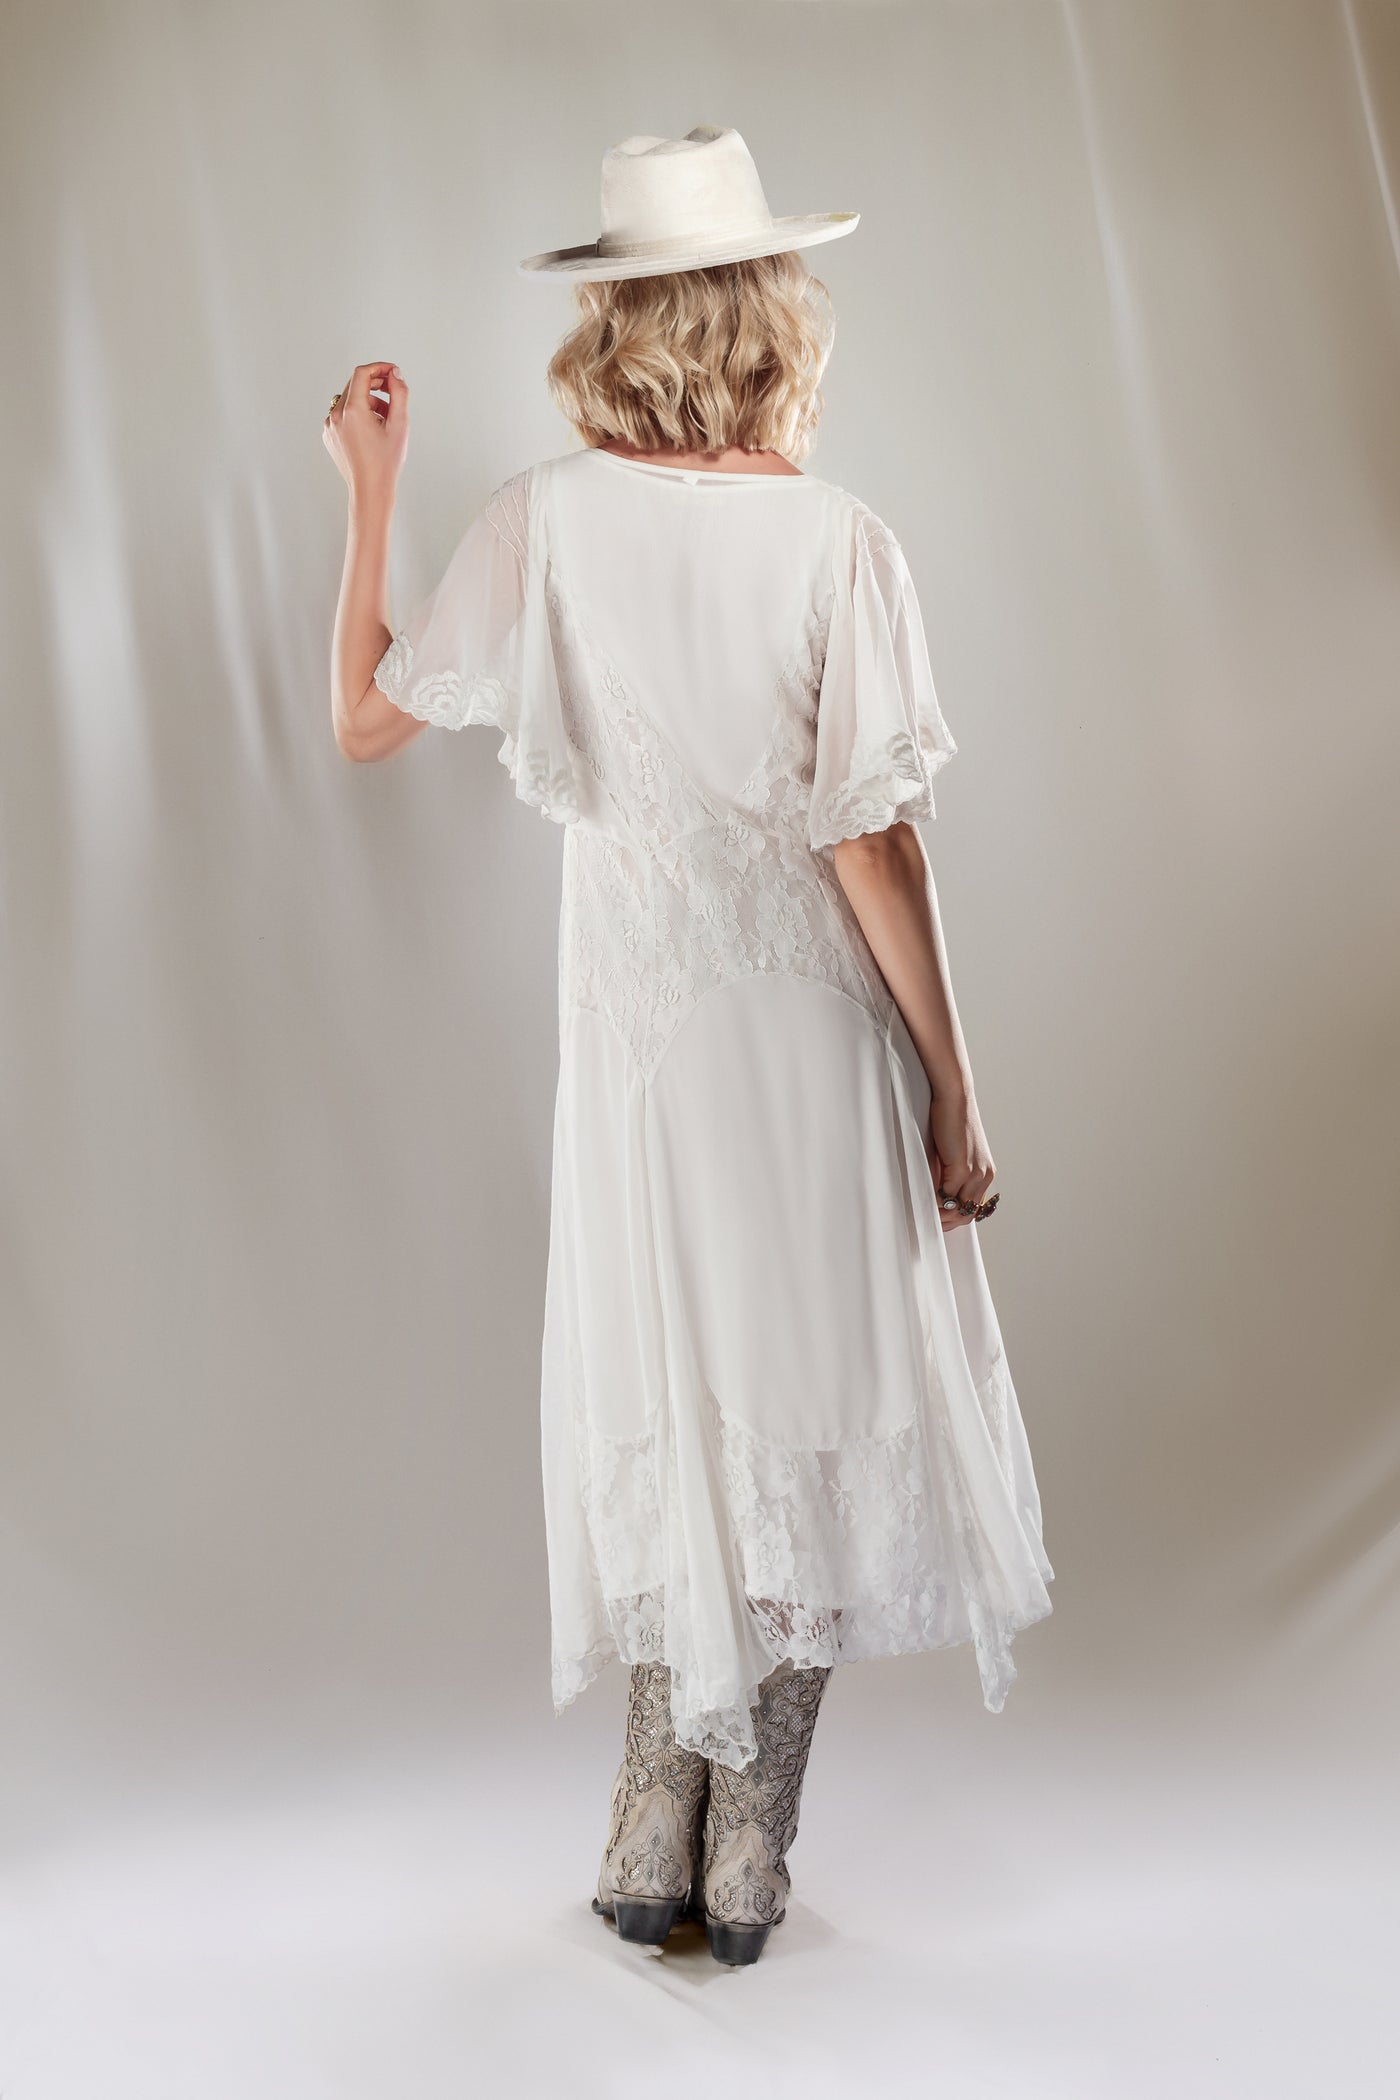 Irene Cactus Blossom Gown in Ivory by Nataya